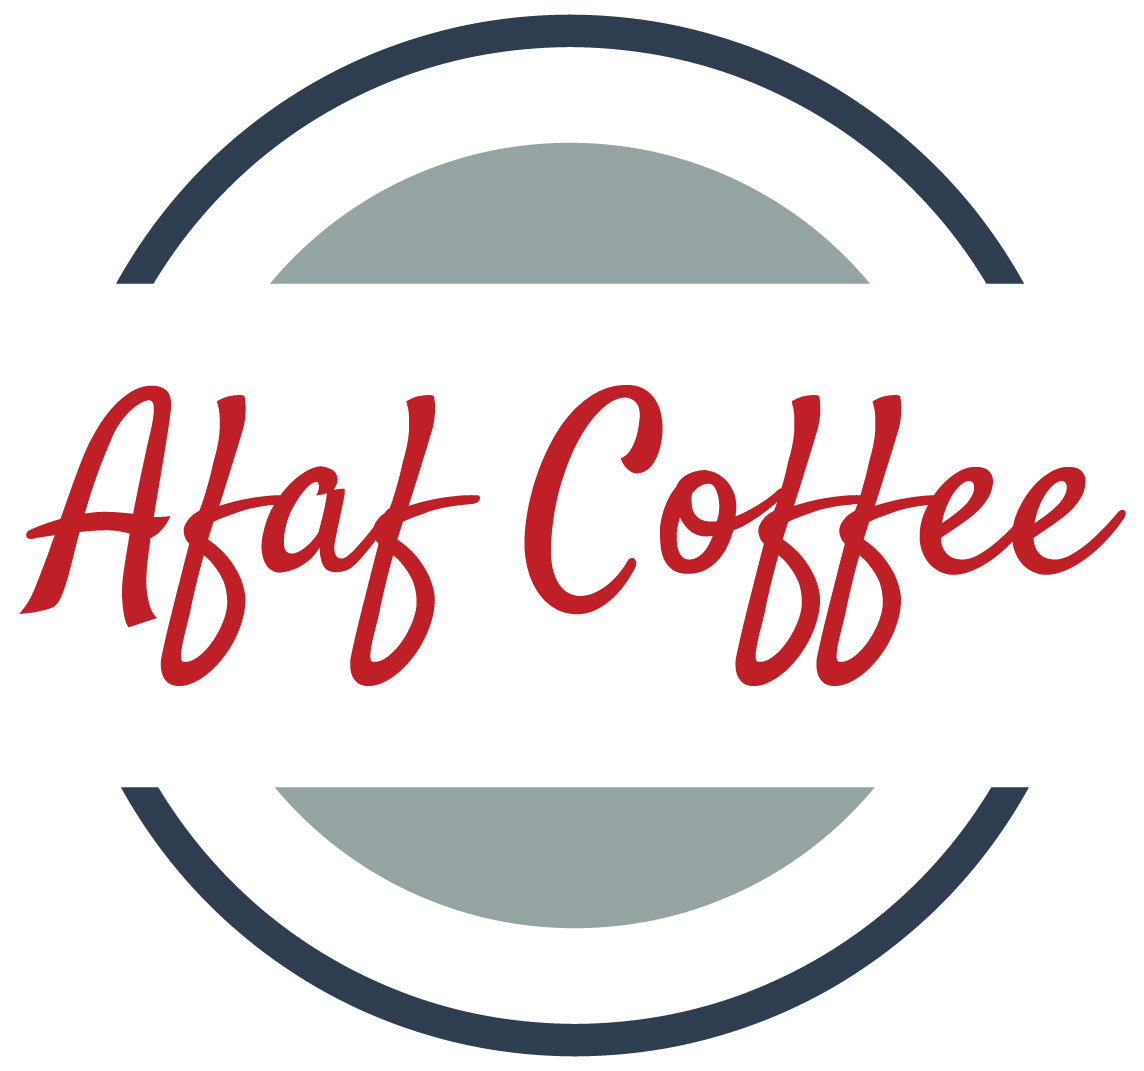 Afaf Coffee - From $34.47 - Avondale, PA